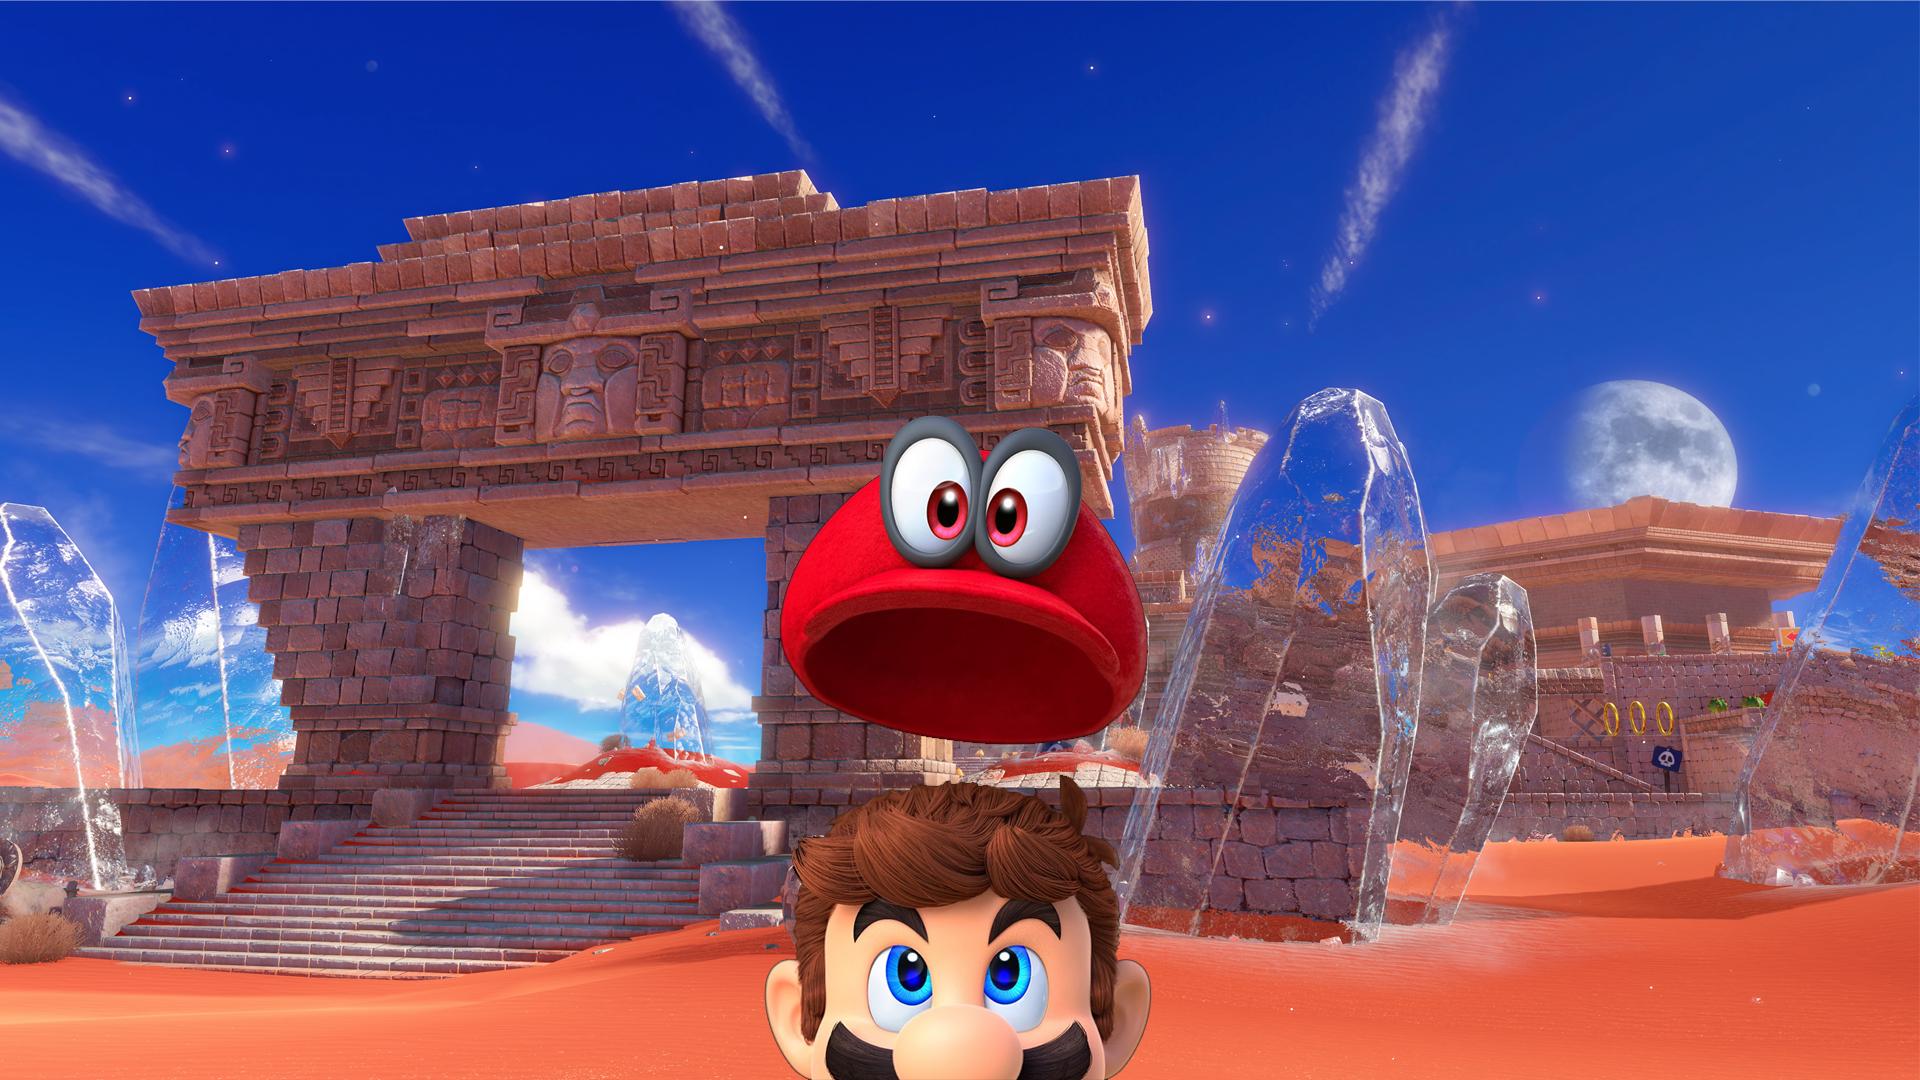 Found a few SMO wallpaper superimposed Mario Cappy on top of them